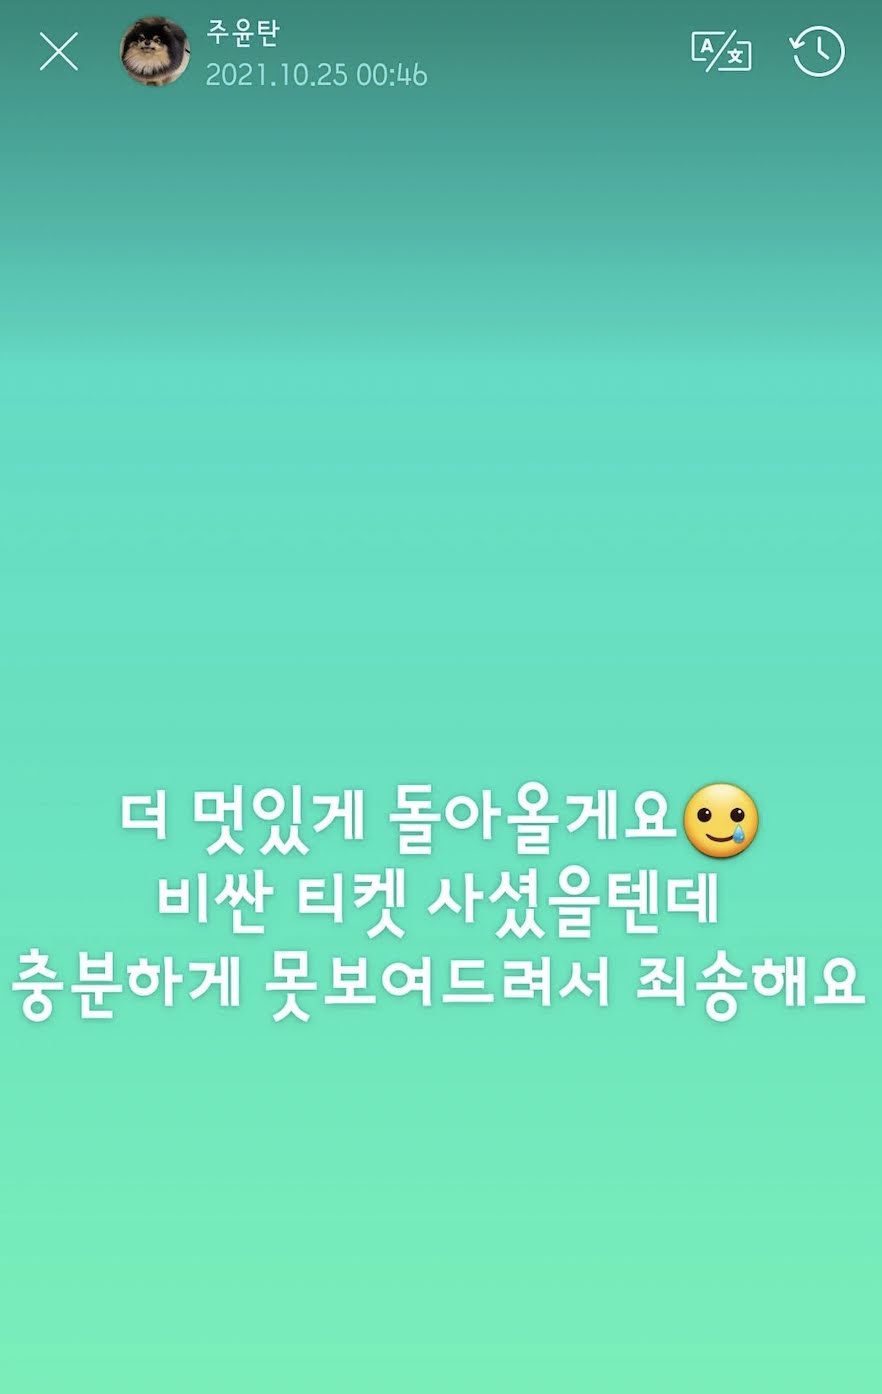 bts v weverse story permission to dance apology 20211024